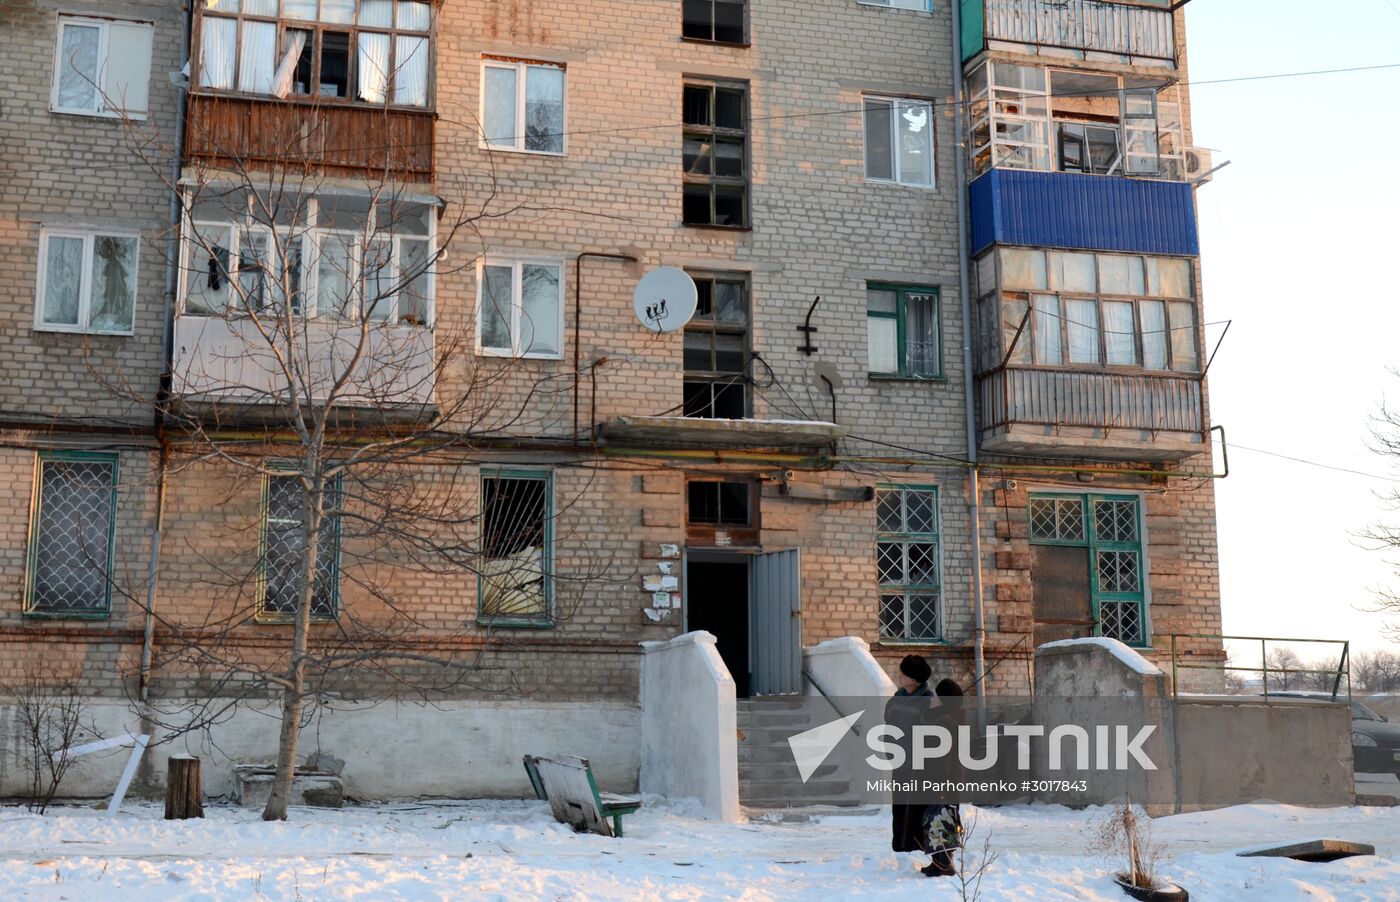 Damage caused by shelling in the Donetsk Region